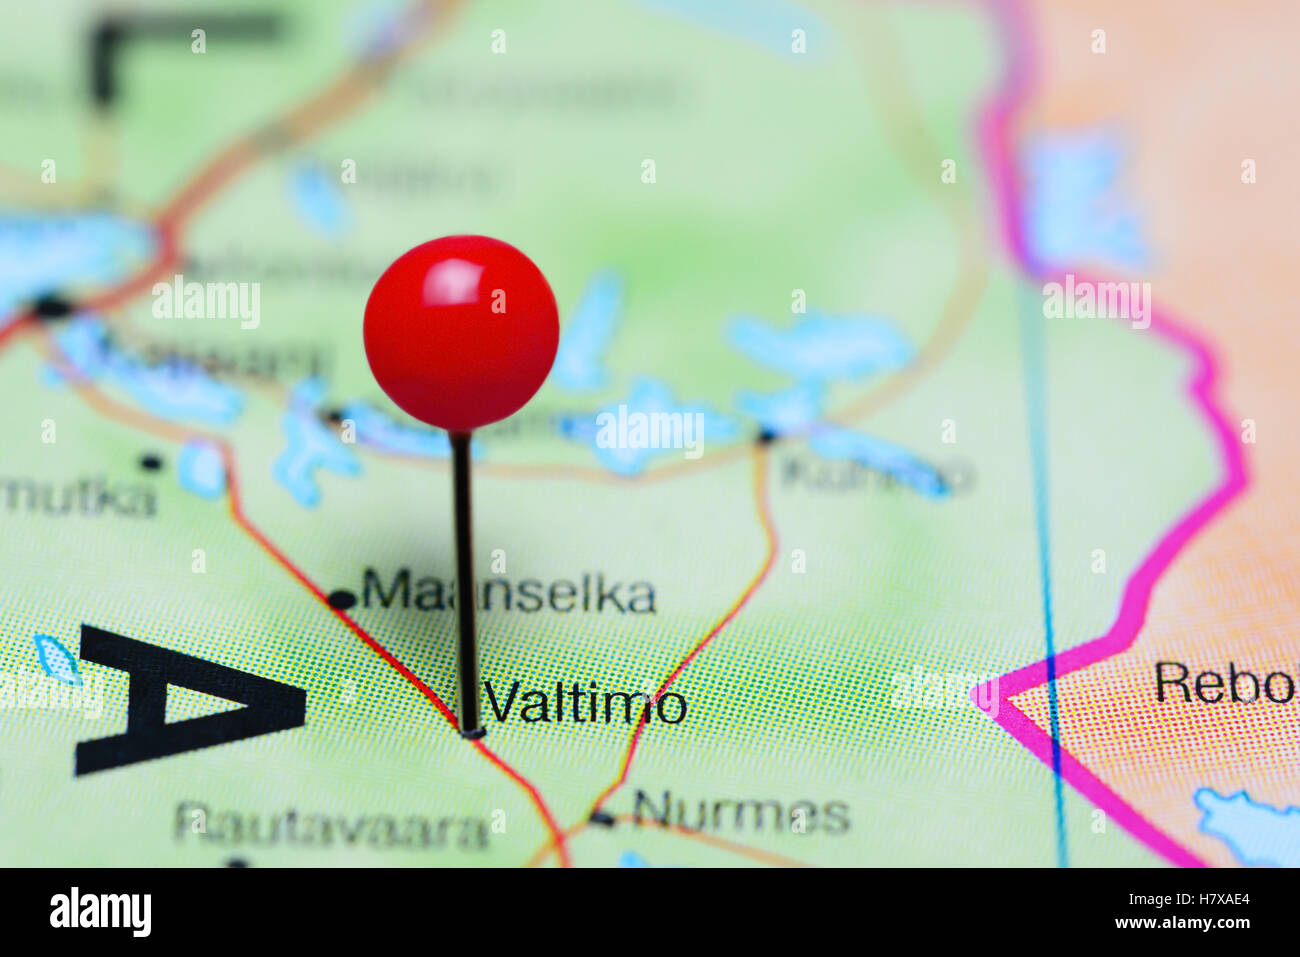 Valtimo pinned on a map of Finland Stock Photo